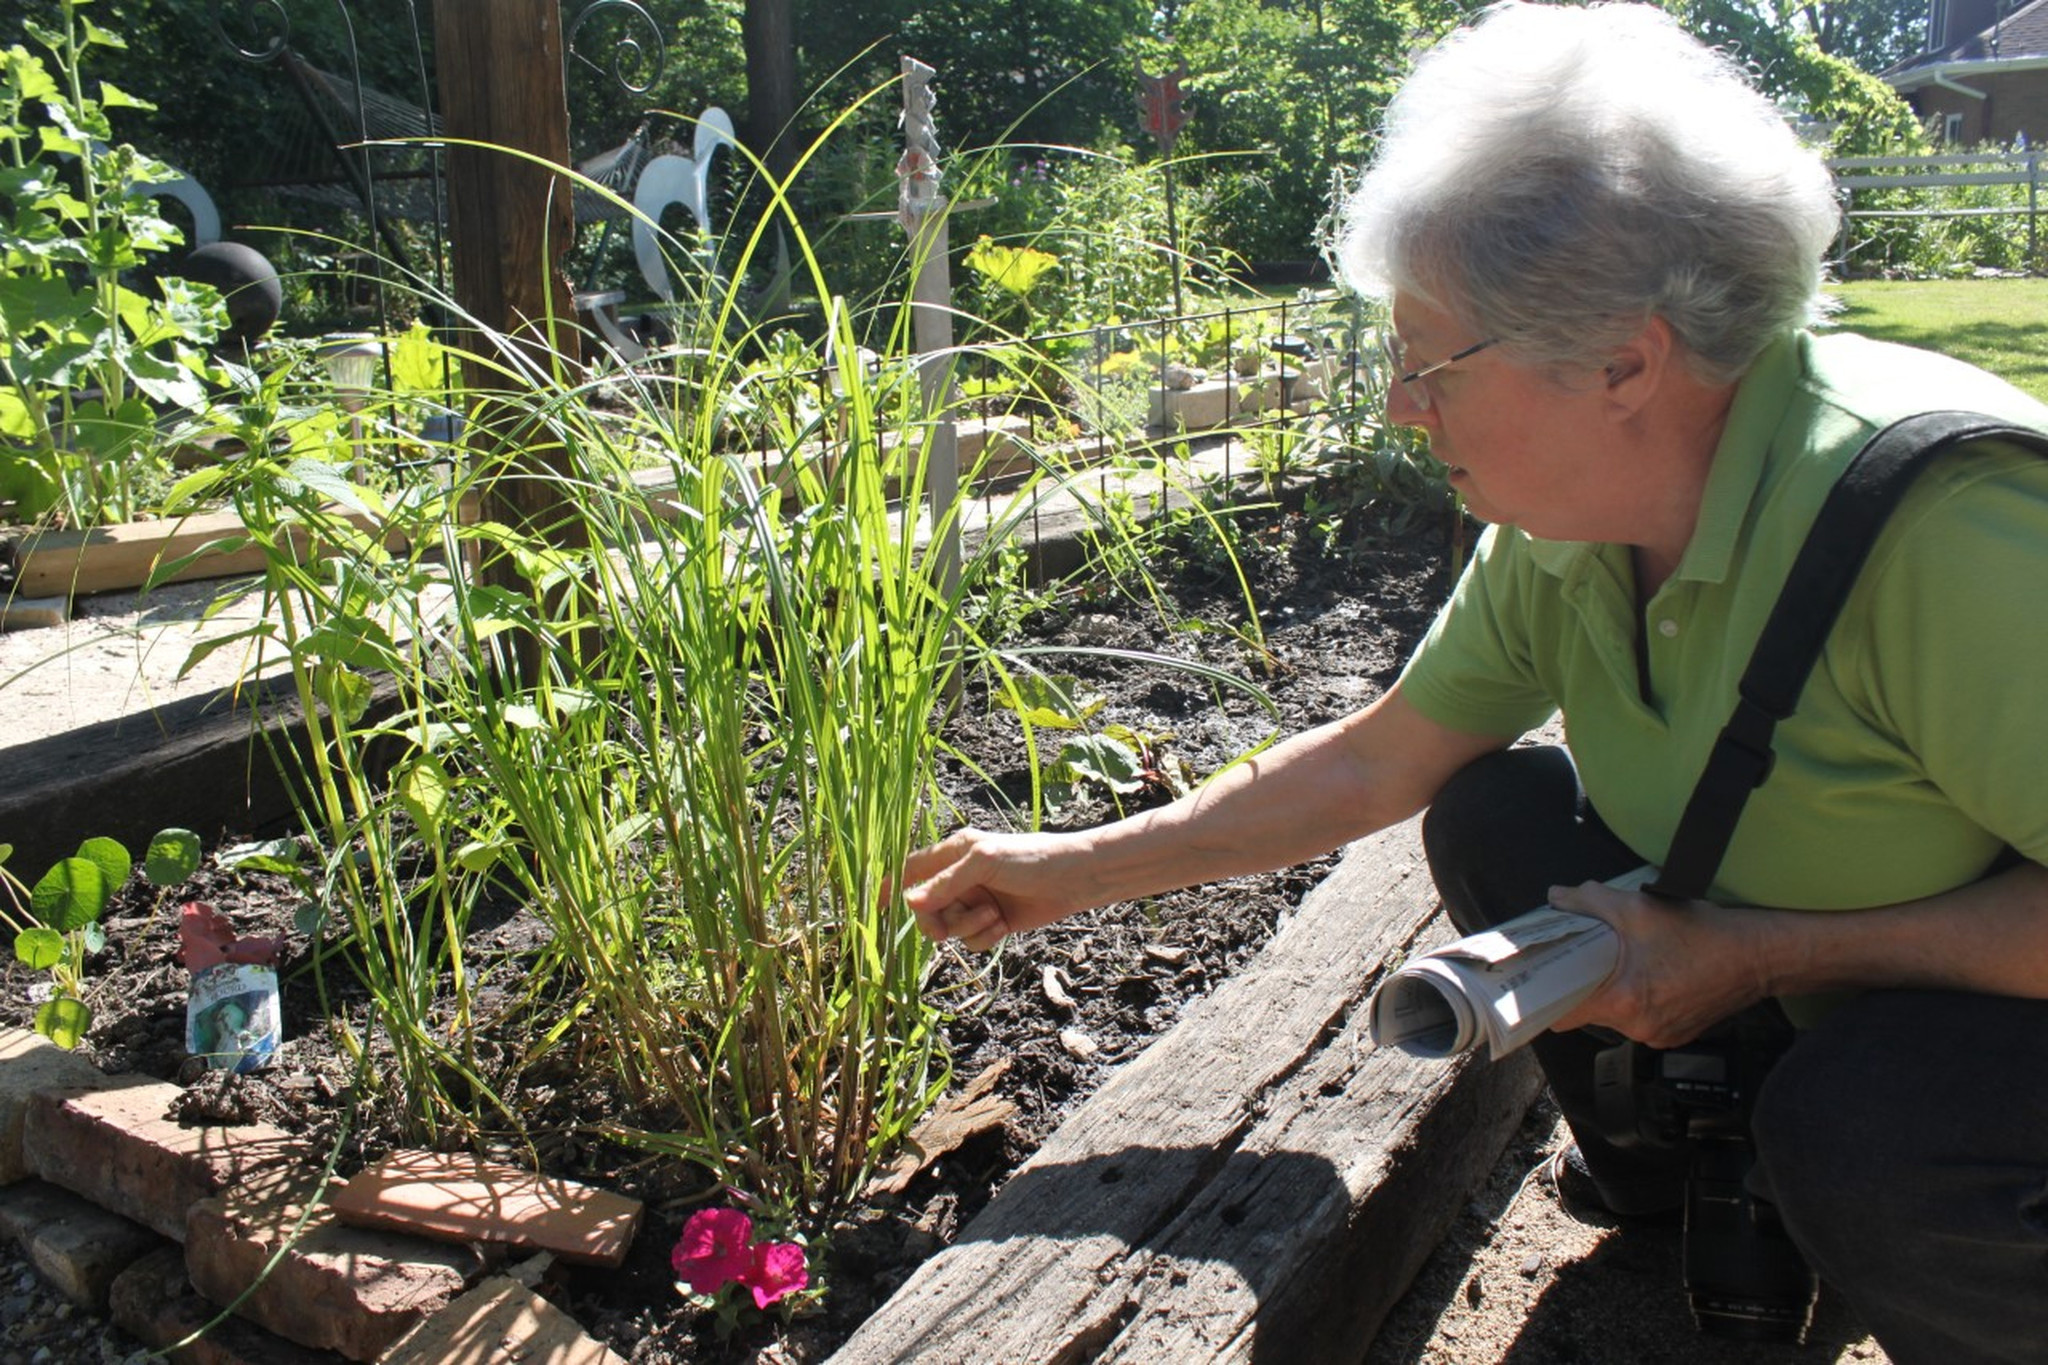 Linda Curtis, a botanist from Lake Villa, examines one of the plants she grows in her yard. She will discuss rare plants Oct. 5 at the Lake Villa Library, as part of the Big Read project in Lake County.